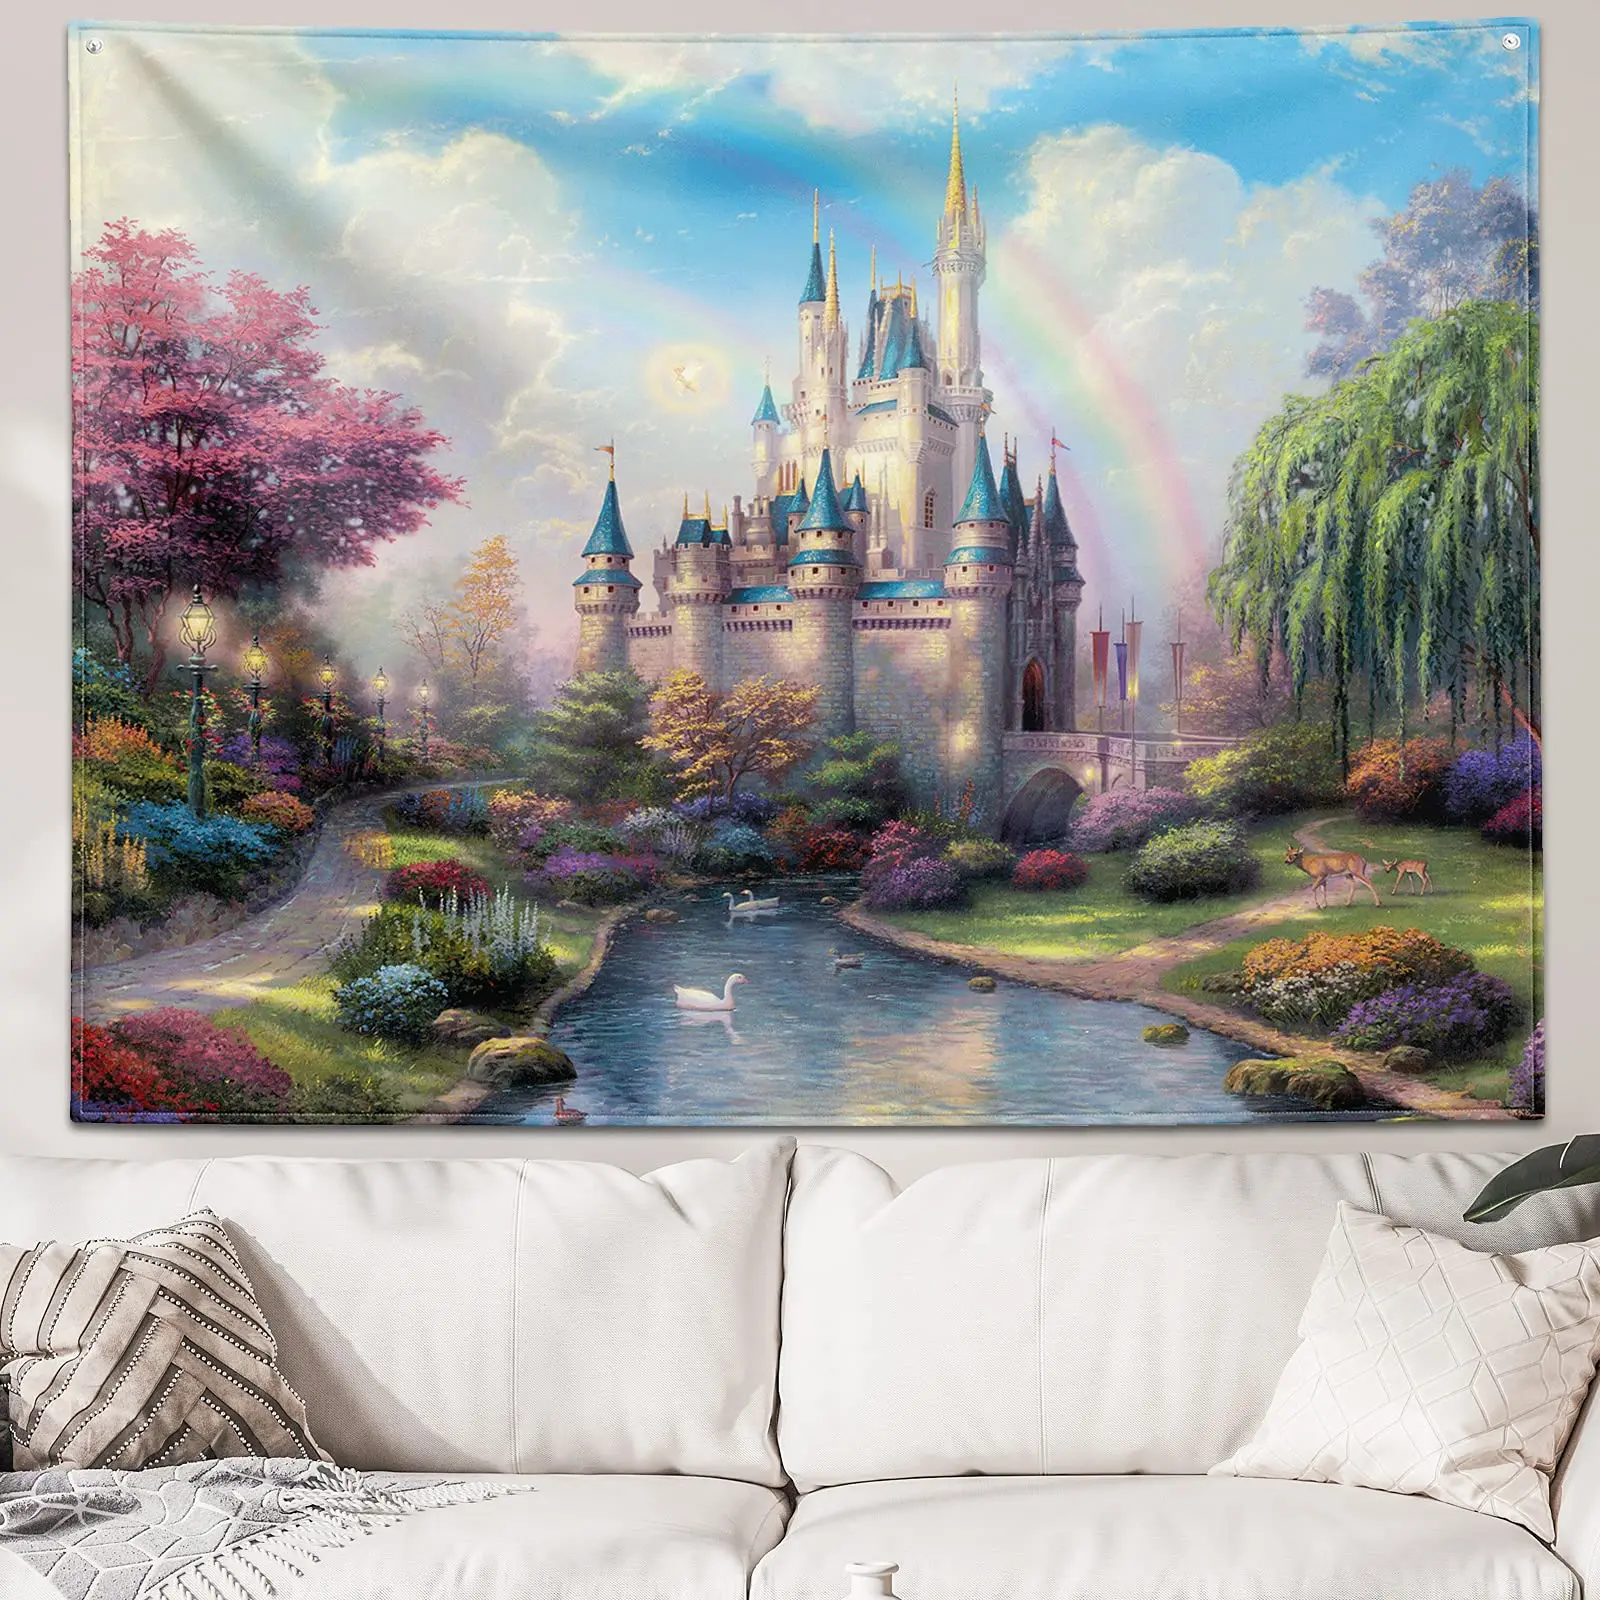 

Castle Tapestry Trees and River In Fantasy Forest Fairy Tale Tapestries for Kids Bedroom Living Room Dorm Party Wall Art Decor